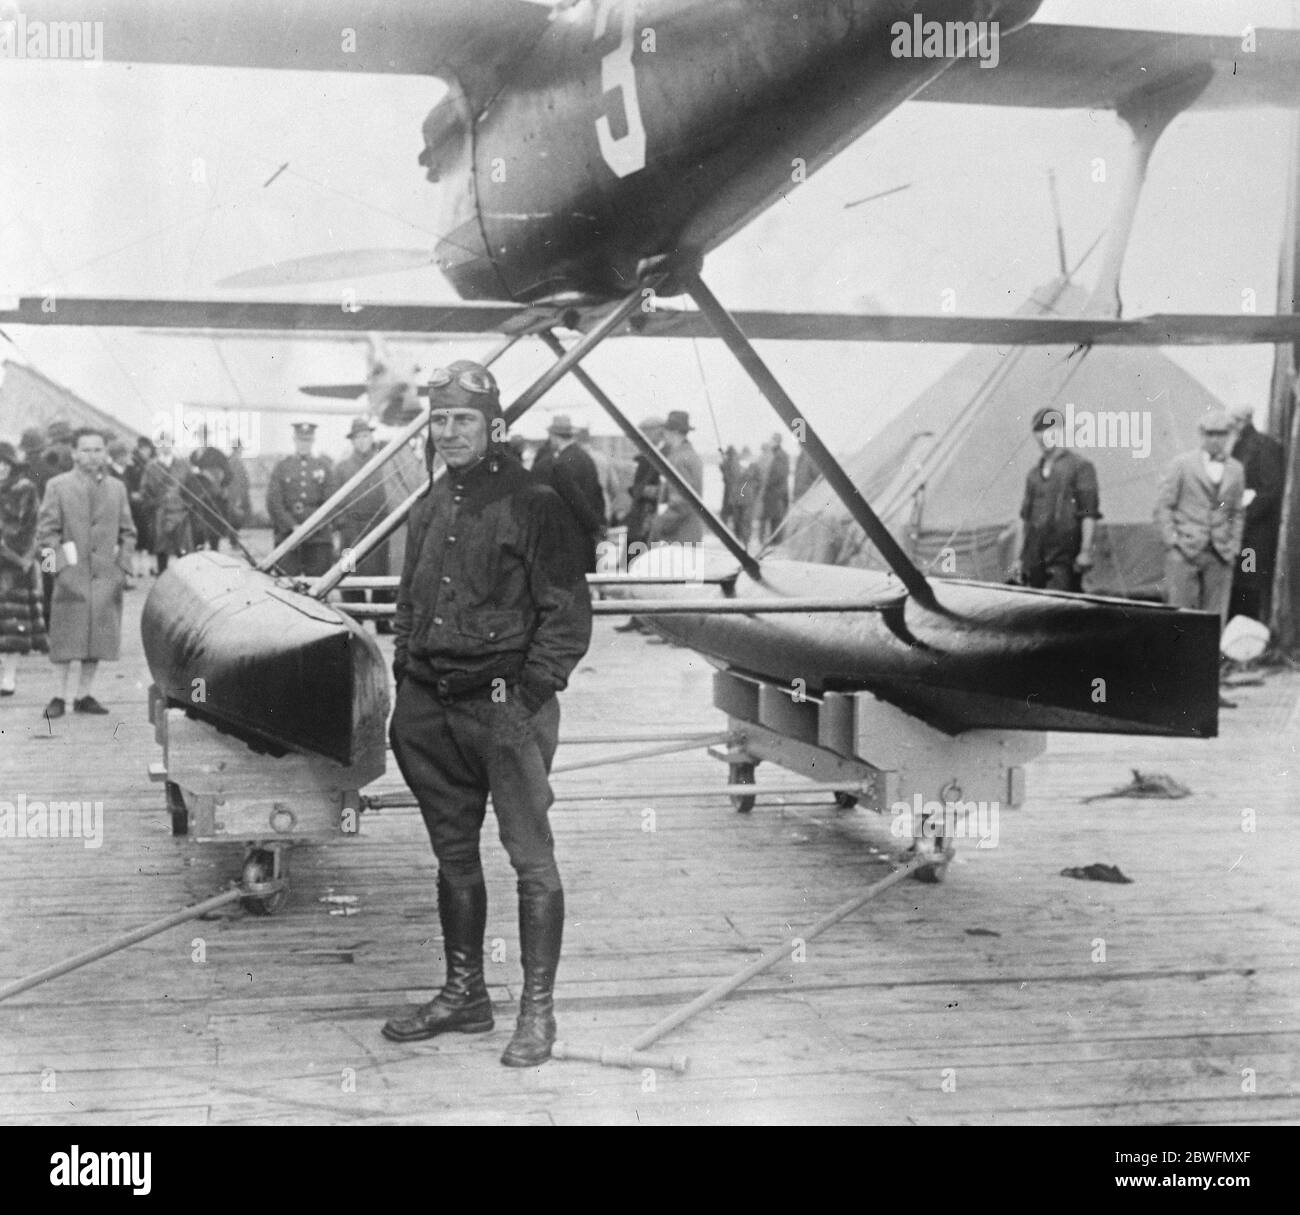 Winner of Schneider cup race Lt James H Doolittle , U S Army , with the Curtiss seaplane that he flew to victory in the Jacques Schneider Trophy seaplane race at Baltimore 4 November 1925 Stock Photo